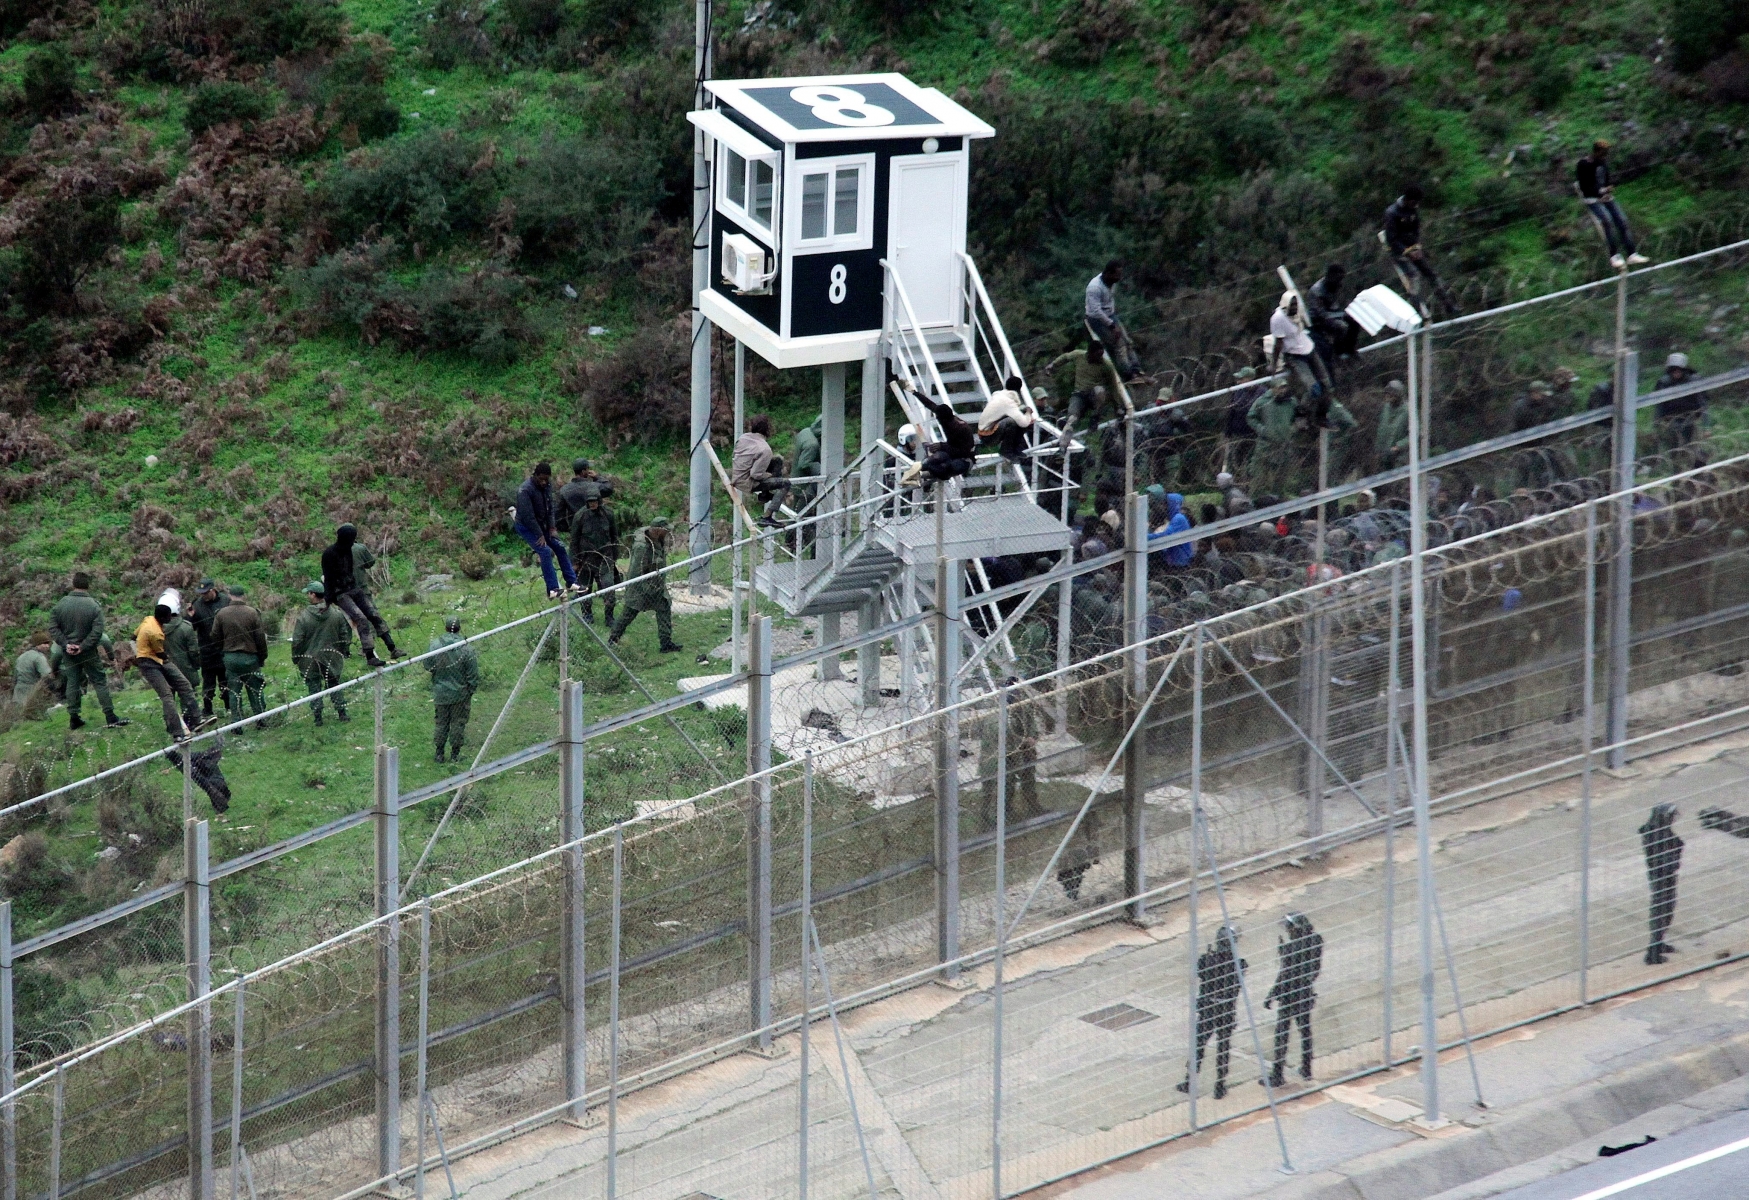 epa05694908 (FILE) - A file photograph showing Moroccan Police looking at immigrants trying to jump the six-meter-high fence in Ceuta, Spanish enclave on the north of Africa, 09 December 2016. Media reports on 02 January 2017 state that more than 1,100 African migrants attempted to storm a border fence in Ceuta injuring fifty Moroccans and five Spanish border guards. Only two migants made it across the border but both needed hospital treatment following their breach.  EPA/REDUAN (FILE) SPAIN MIGRATION CEUTA